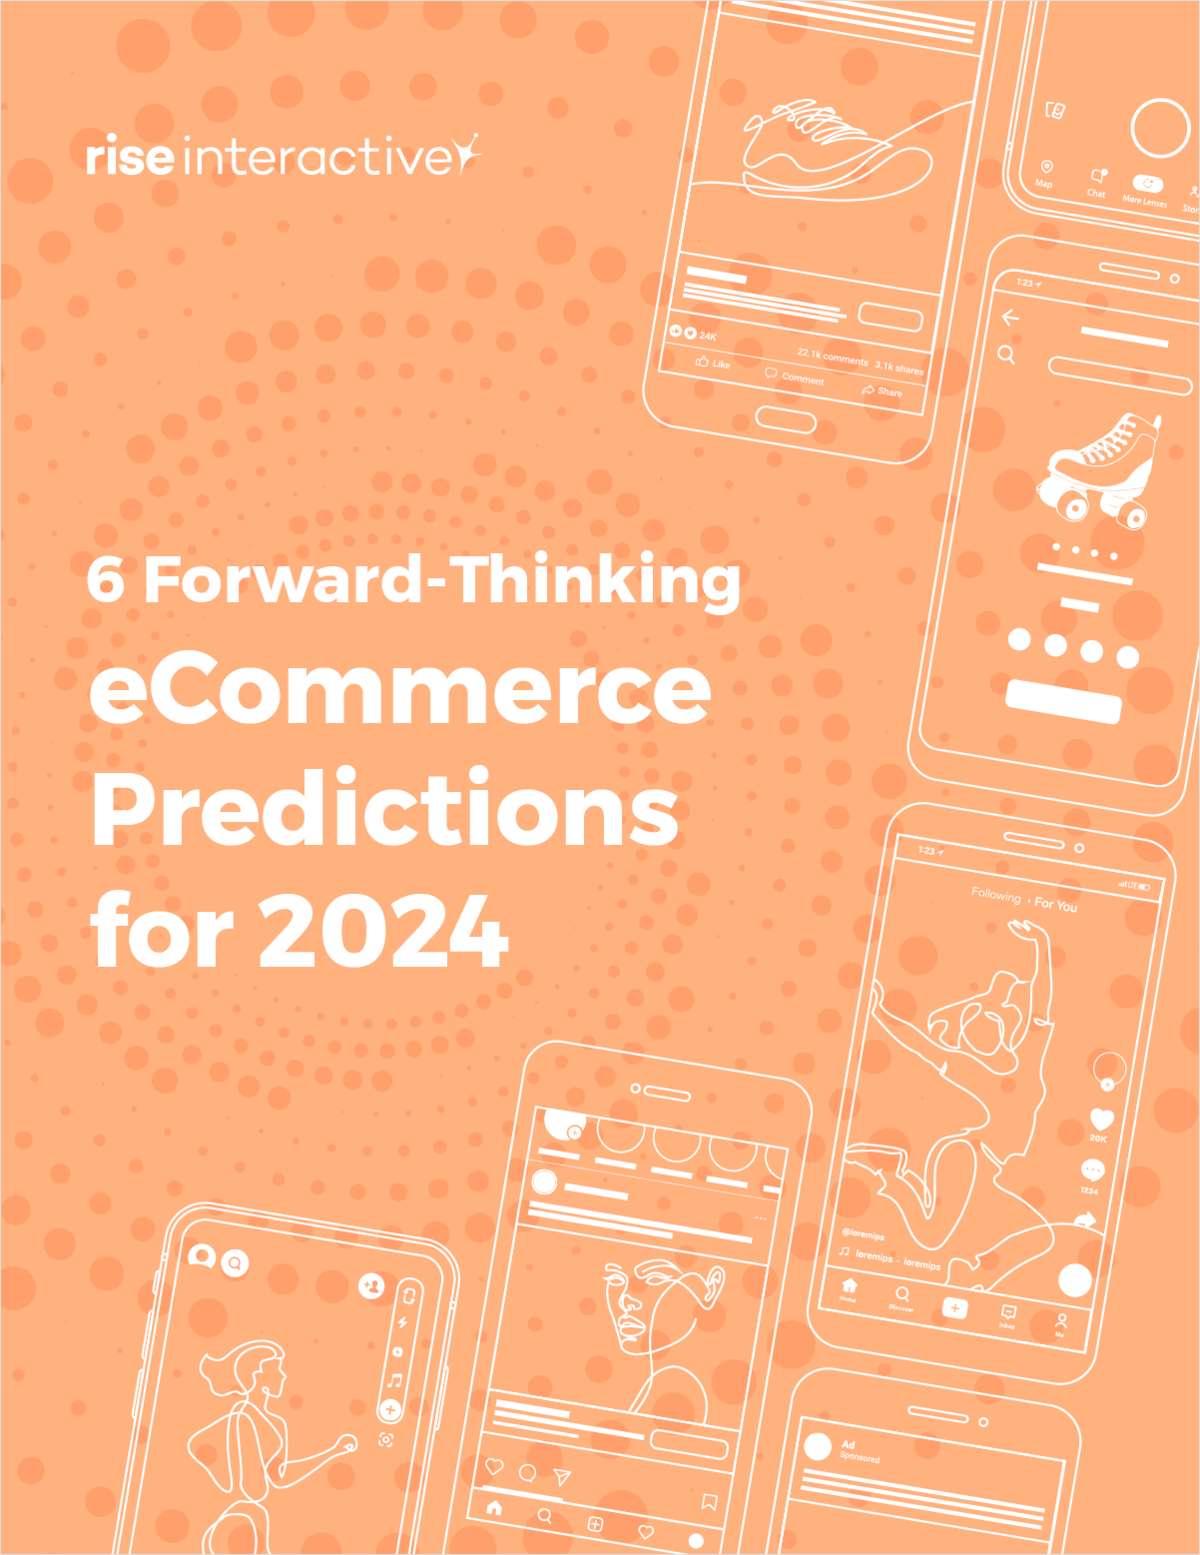 6 Forward-Thinking eCommerce Predictions for 2024